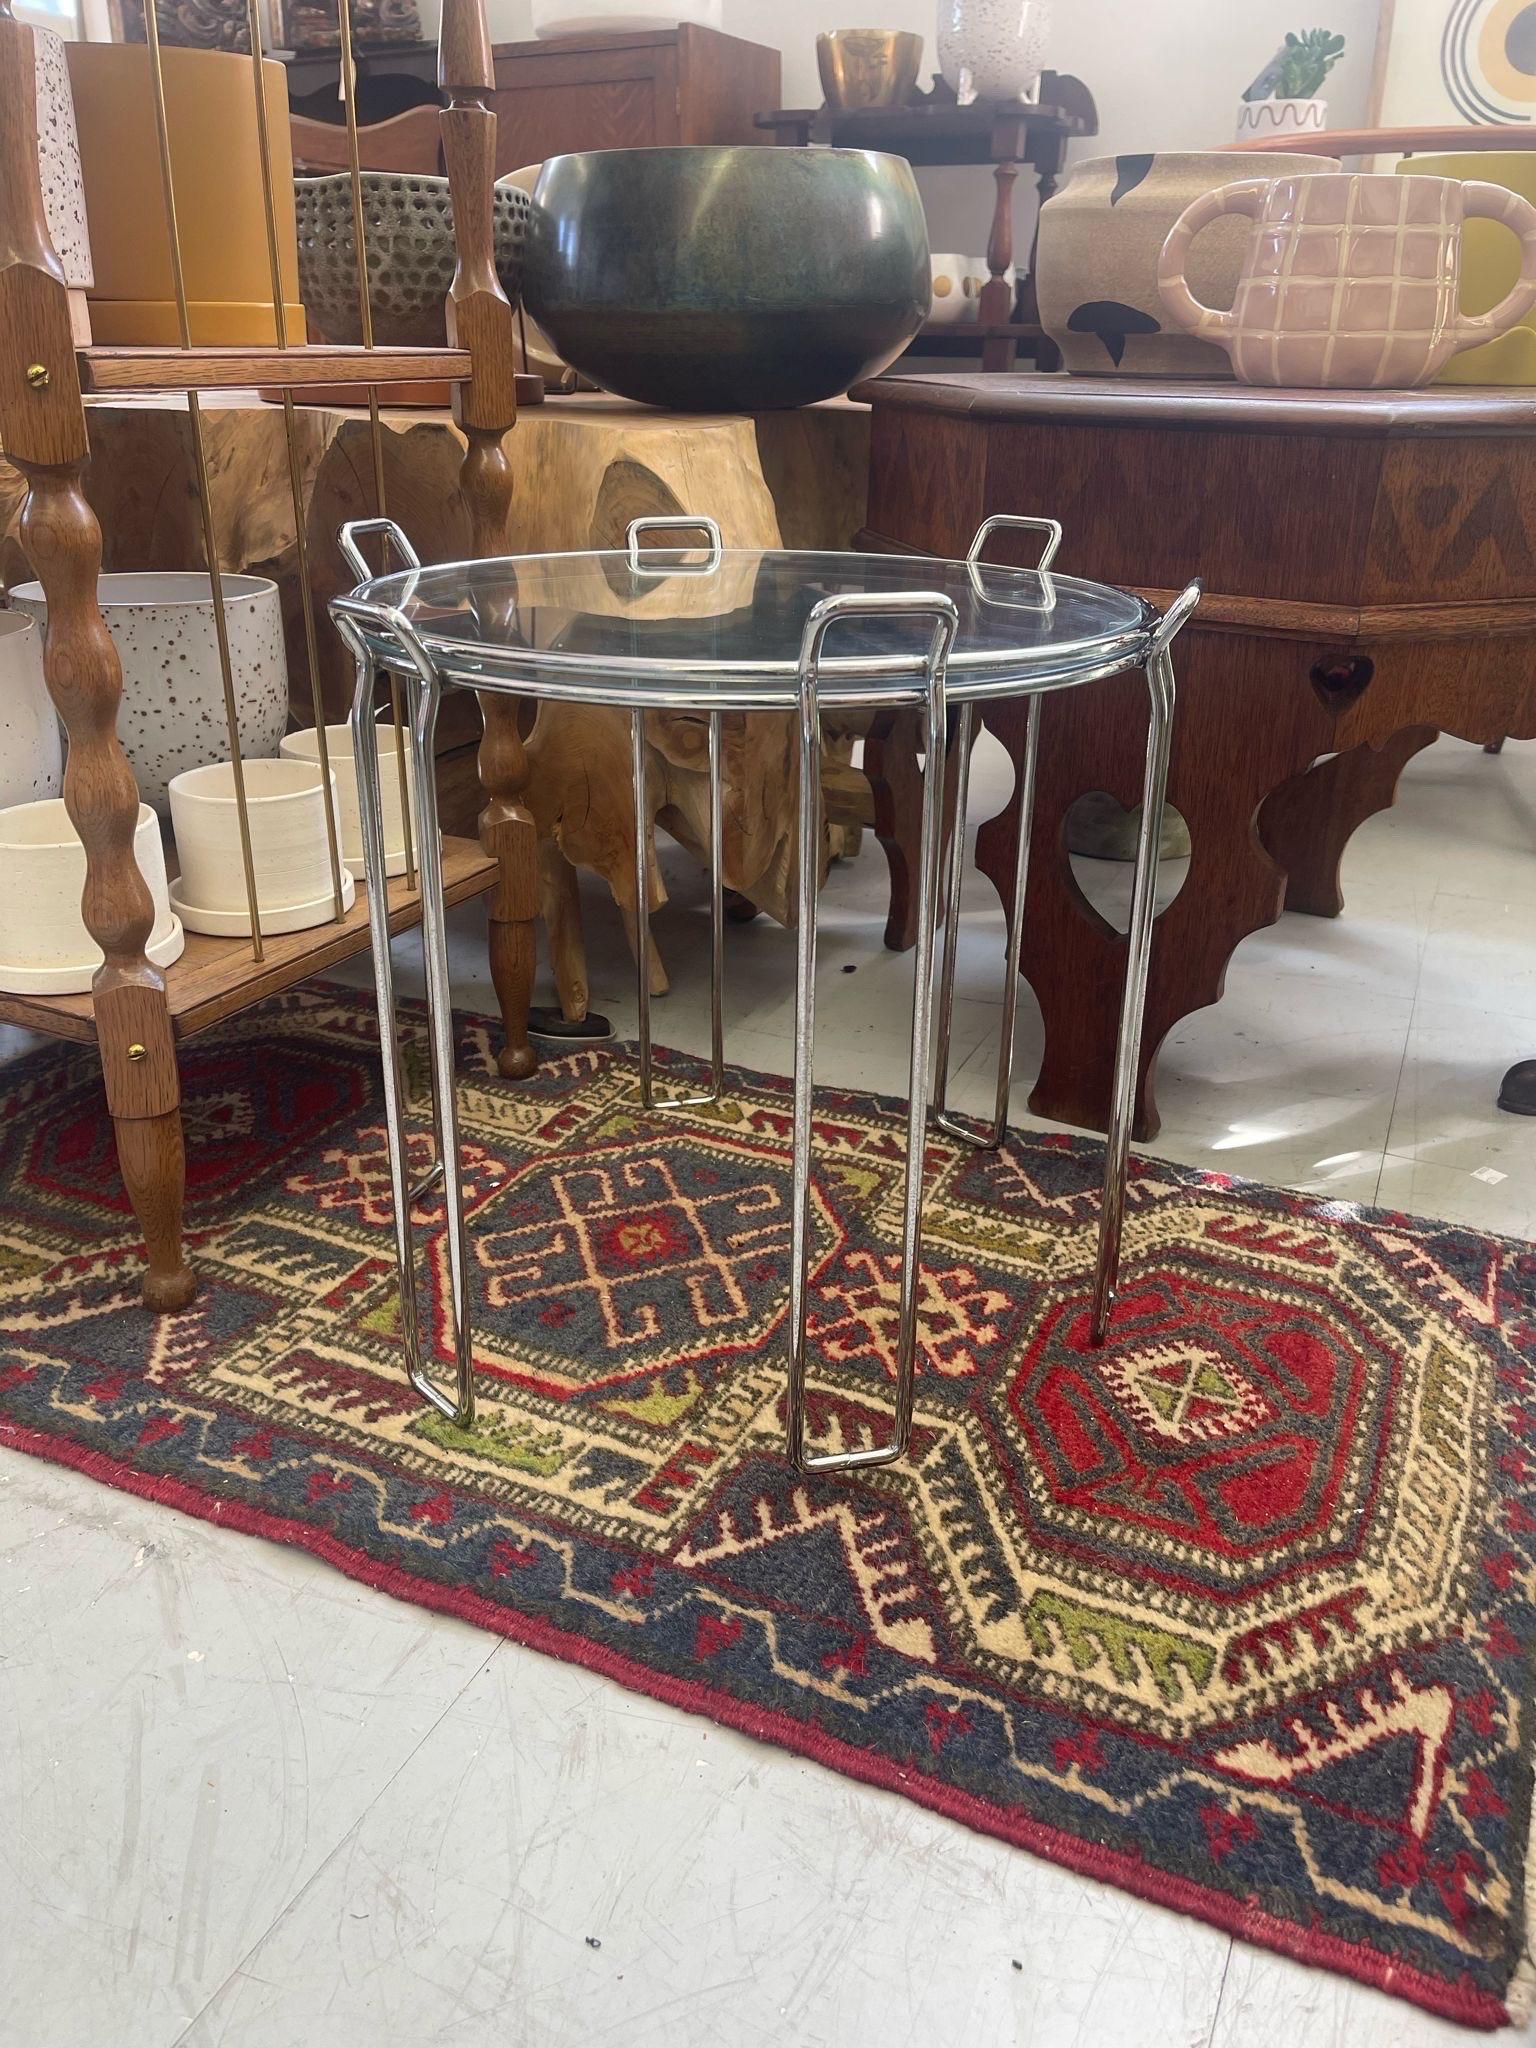 This pair of circular Nesting Tables has removable glass  trays. They sit on rectangular hairpin legs with tabs at the top. Made In Italy. Circa 1970. They rest on top of each other nicely with sleek design. Vintage Condition Consistent with Age as